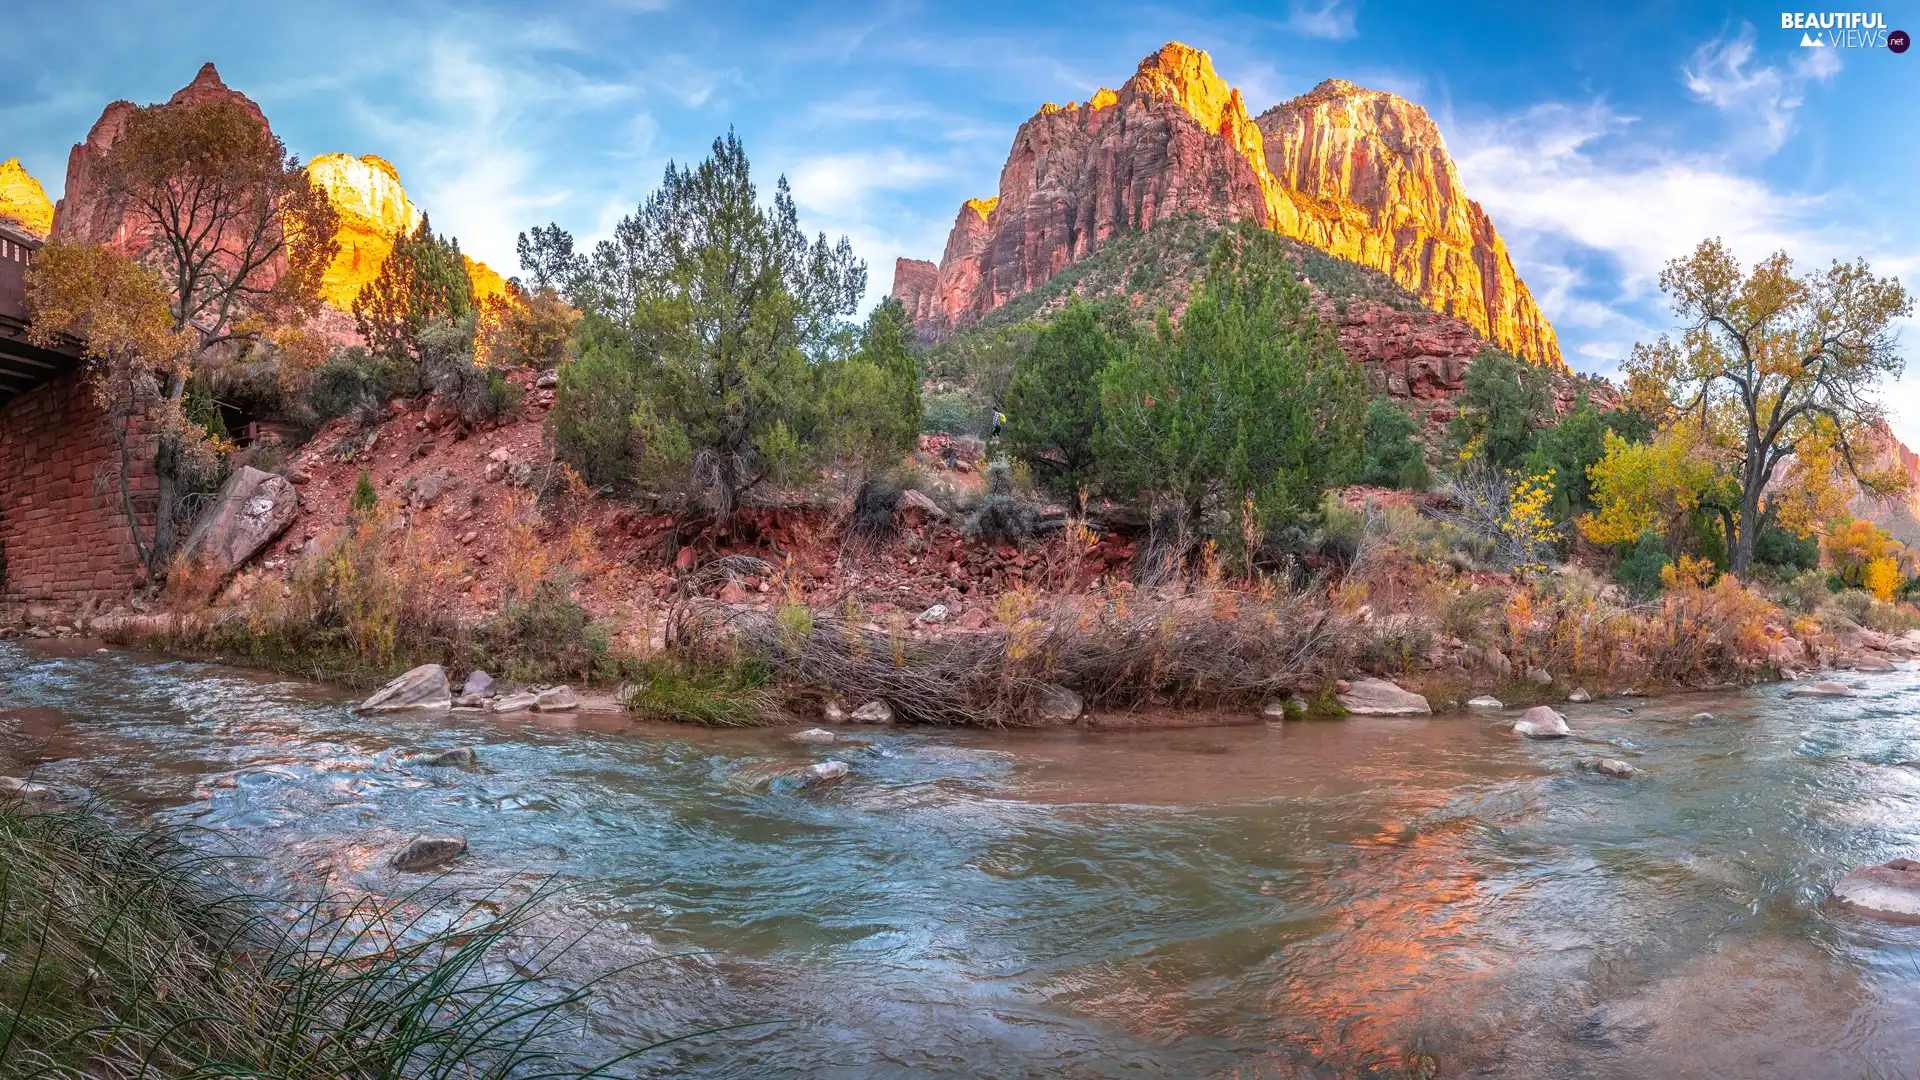 Watchman Mountains, Zion National Park, trees, viewes, Utah State, The United States, Virgin River, Stones, rocks